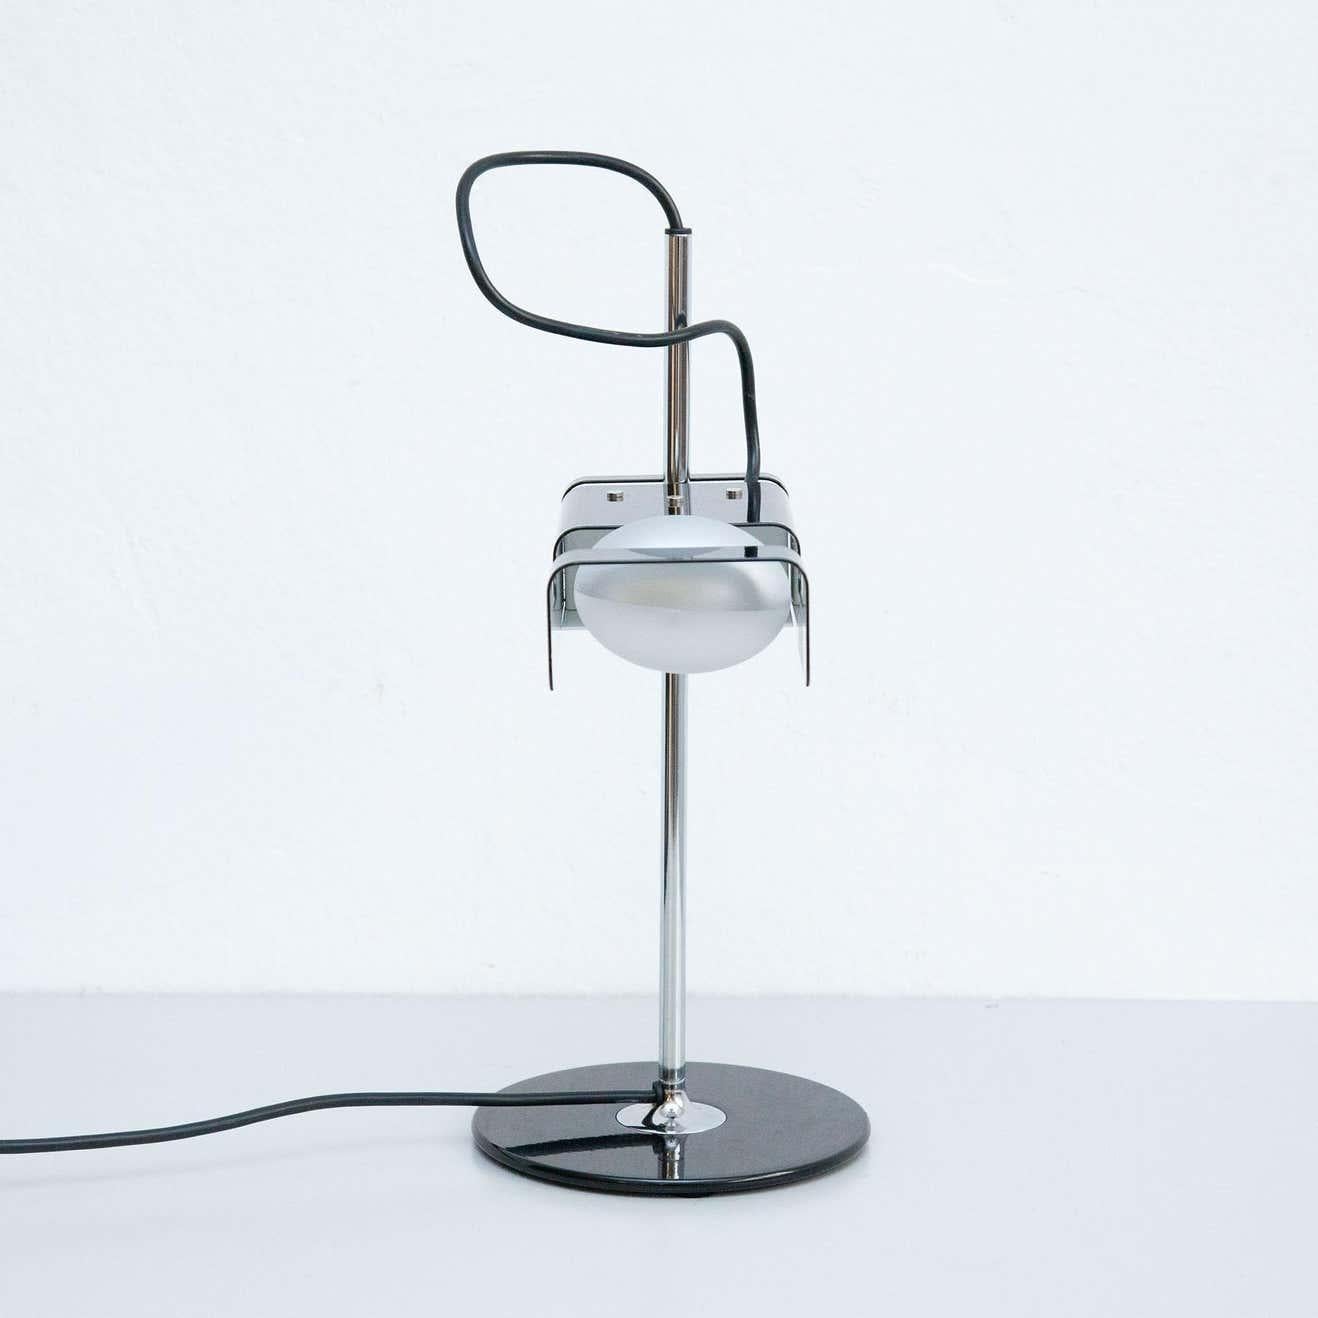 Table lamp 'Spider' designed by Joe Colombo in 1965.
Table lamp giving direct light, lacquered metal base, chromium-plated stem, adjustable reflector in lacquered aluminium. Manufactured by Oluce, Italy.

Table lamp with stove-enameled sheet